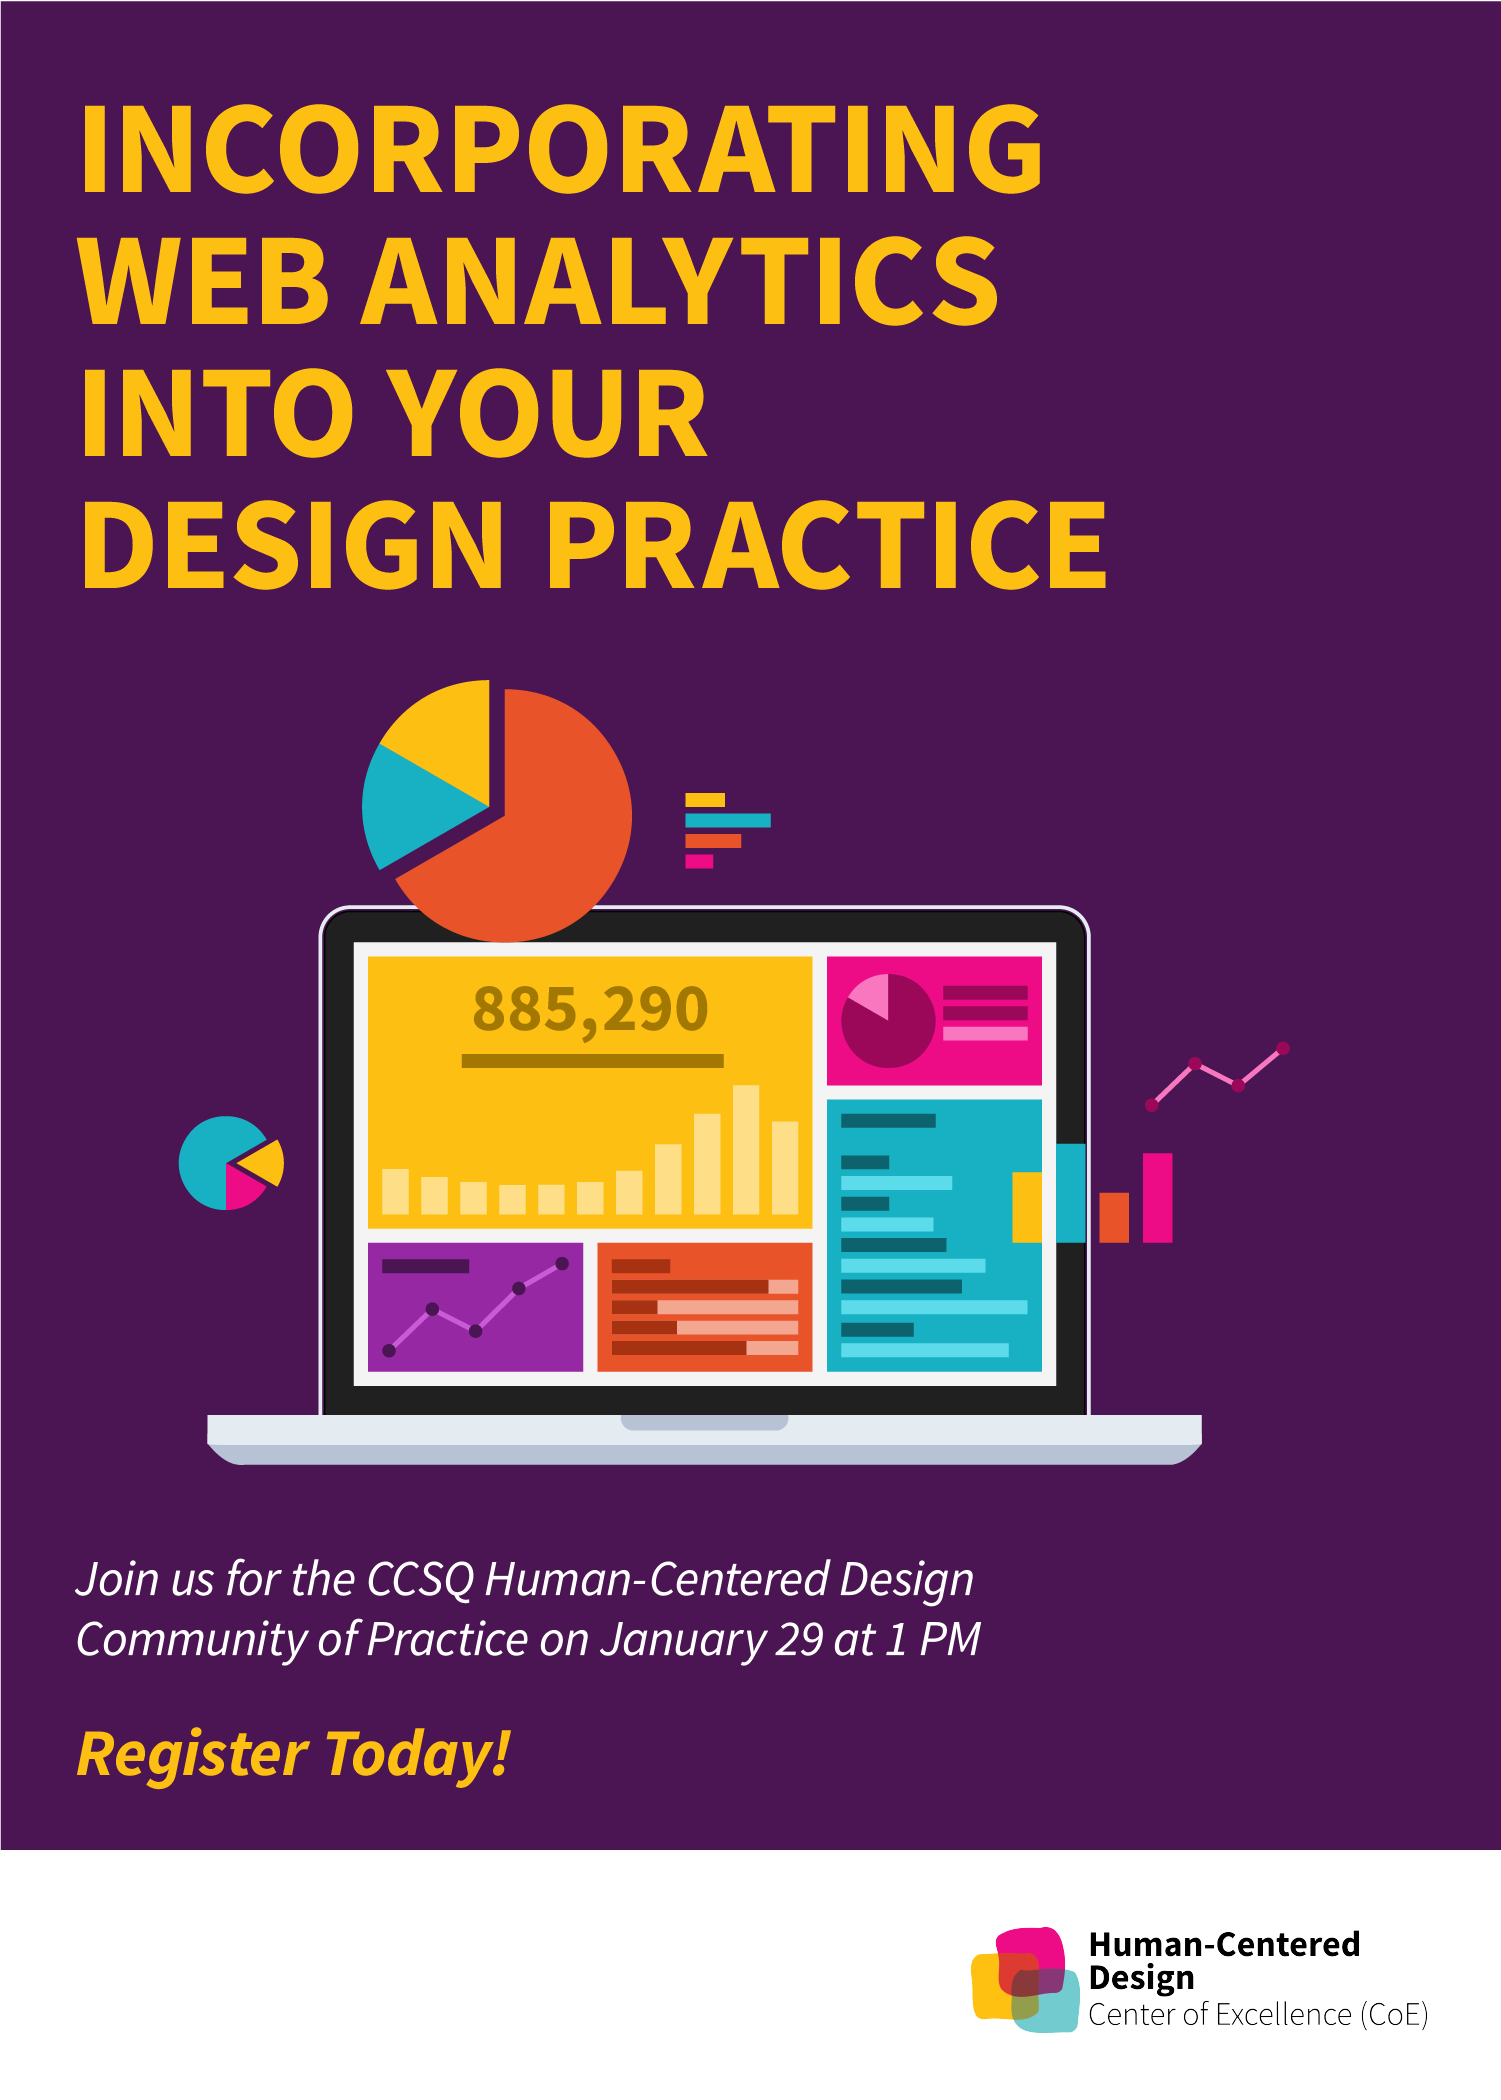 Join us for the CCSQ HCD Community of Practice on January 29, 2020.